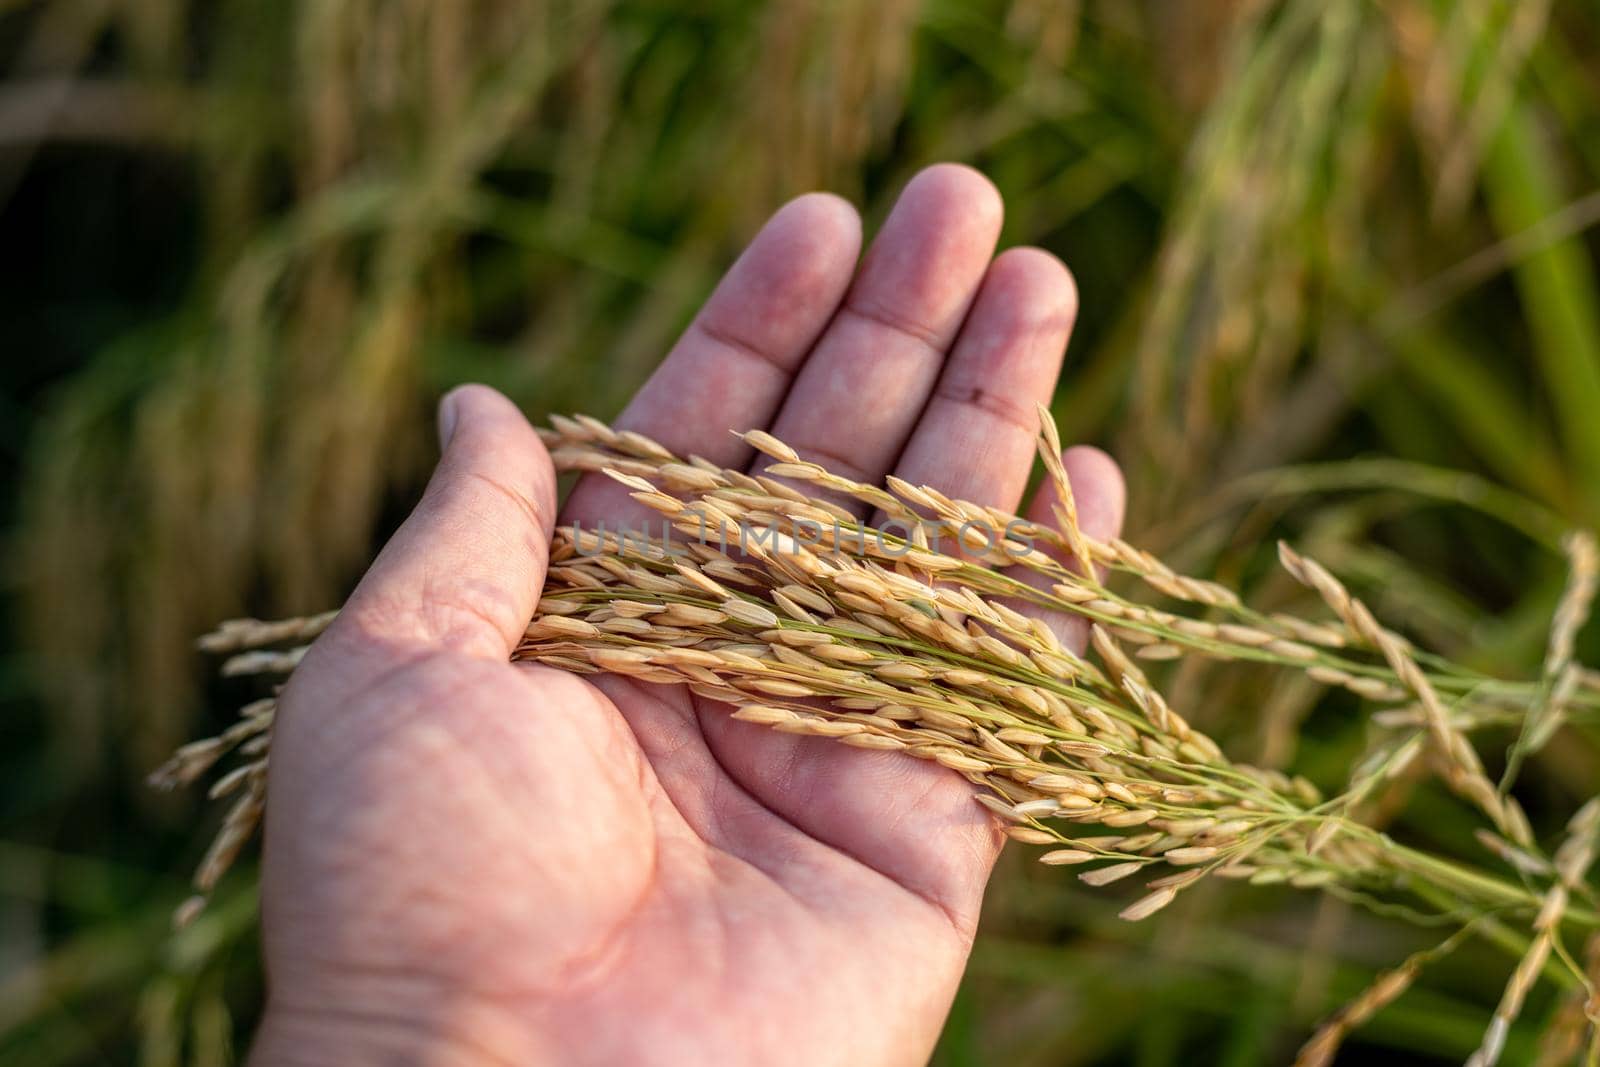 Farmer holding rice ears in hand for examining and inspection